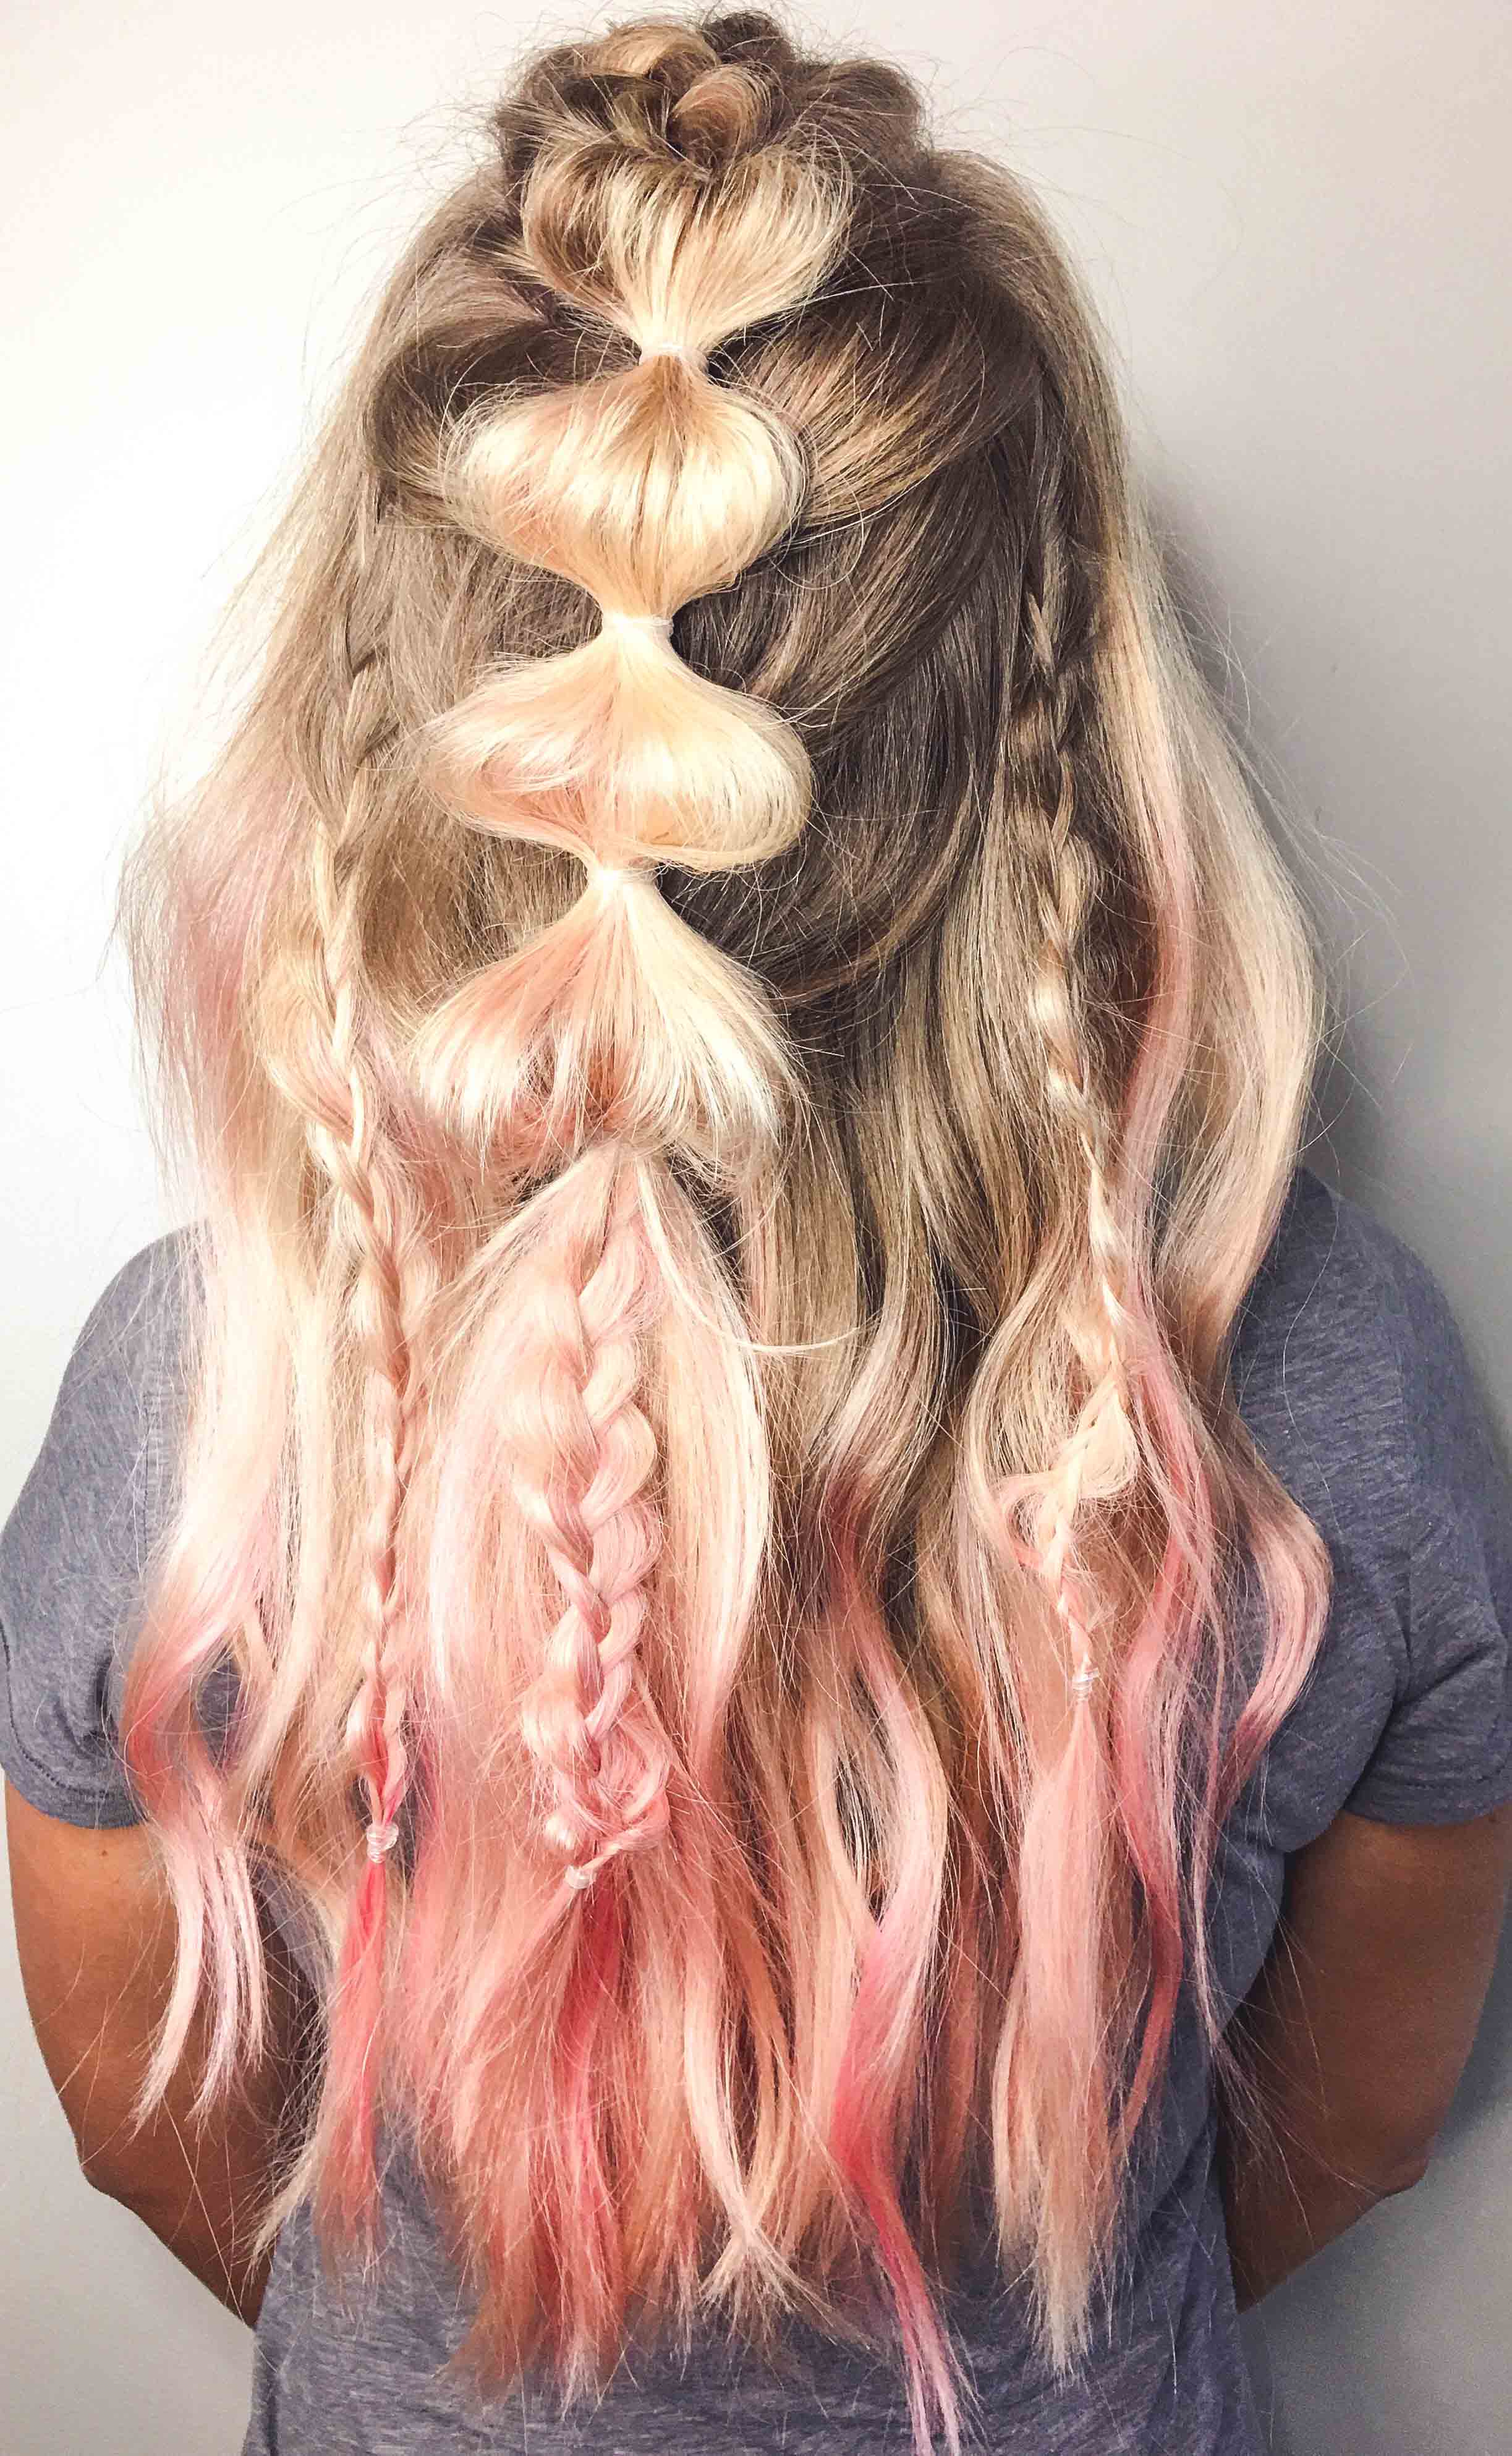 How-to: Unicorn Hairstyle by Atlanta blogger Jessica of Happily Hughes